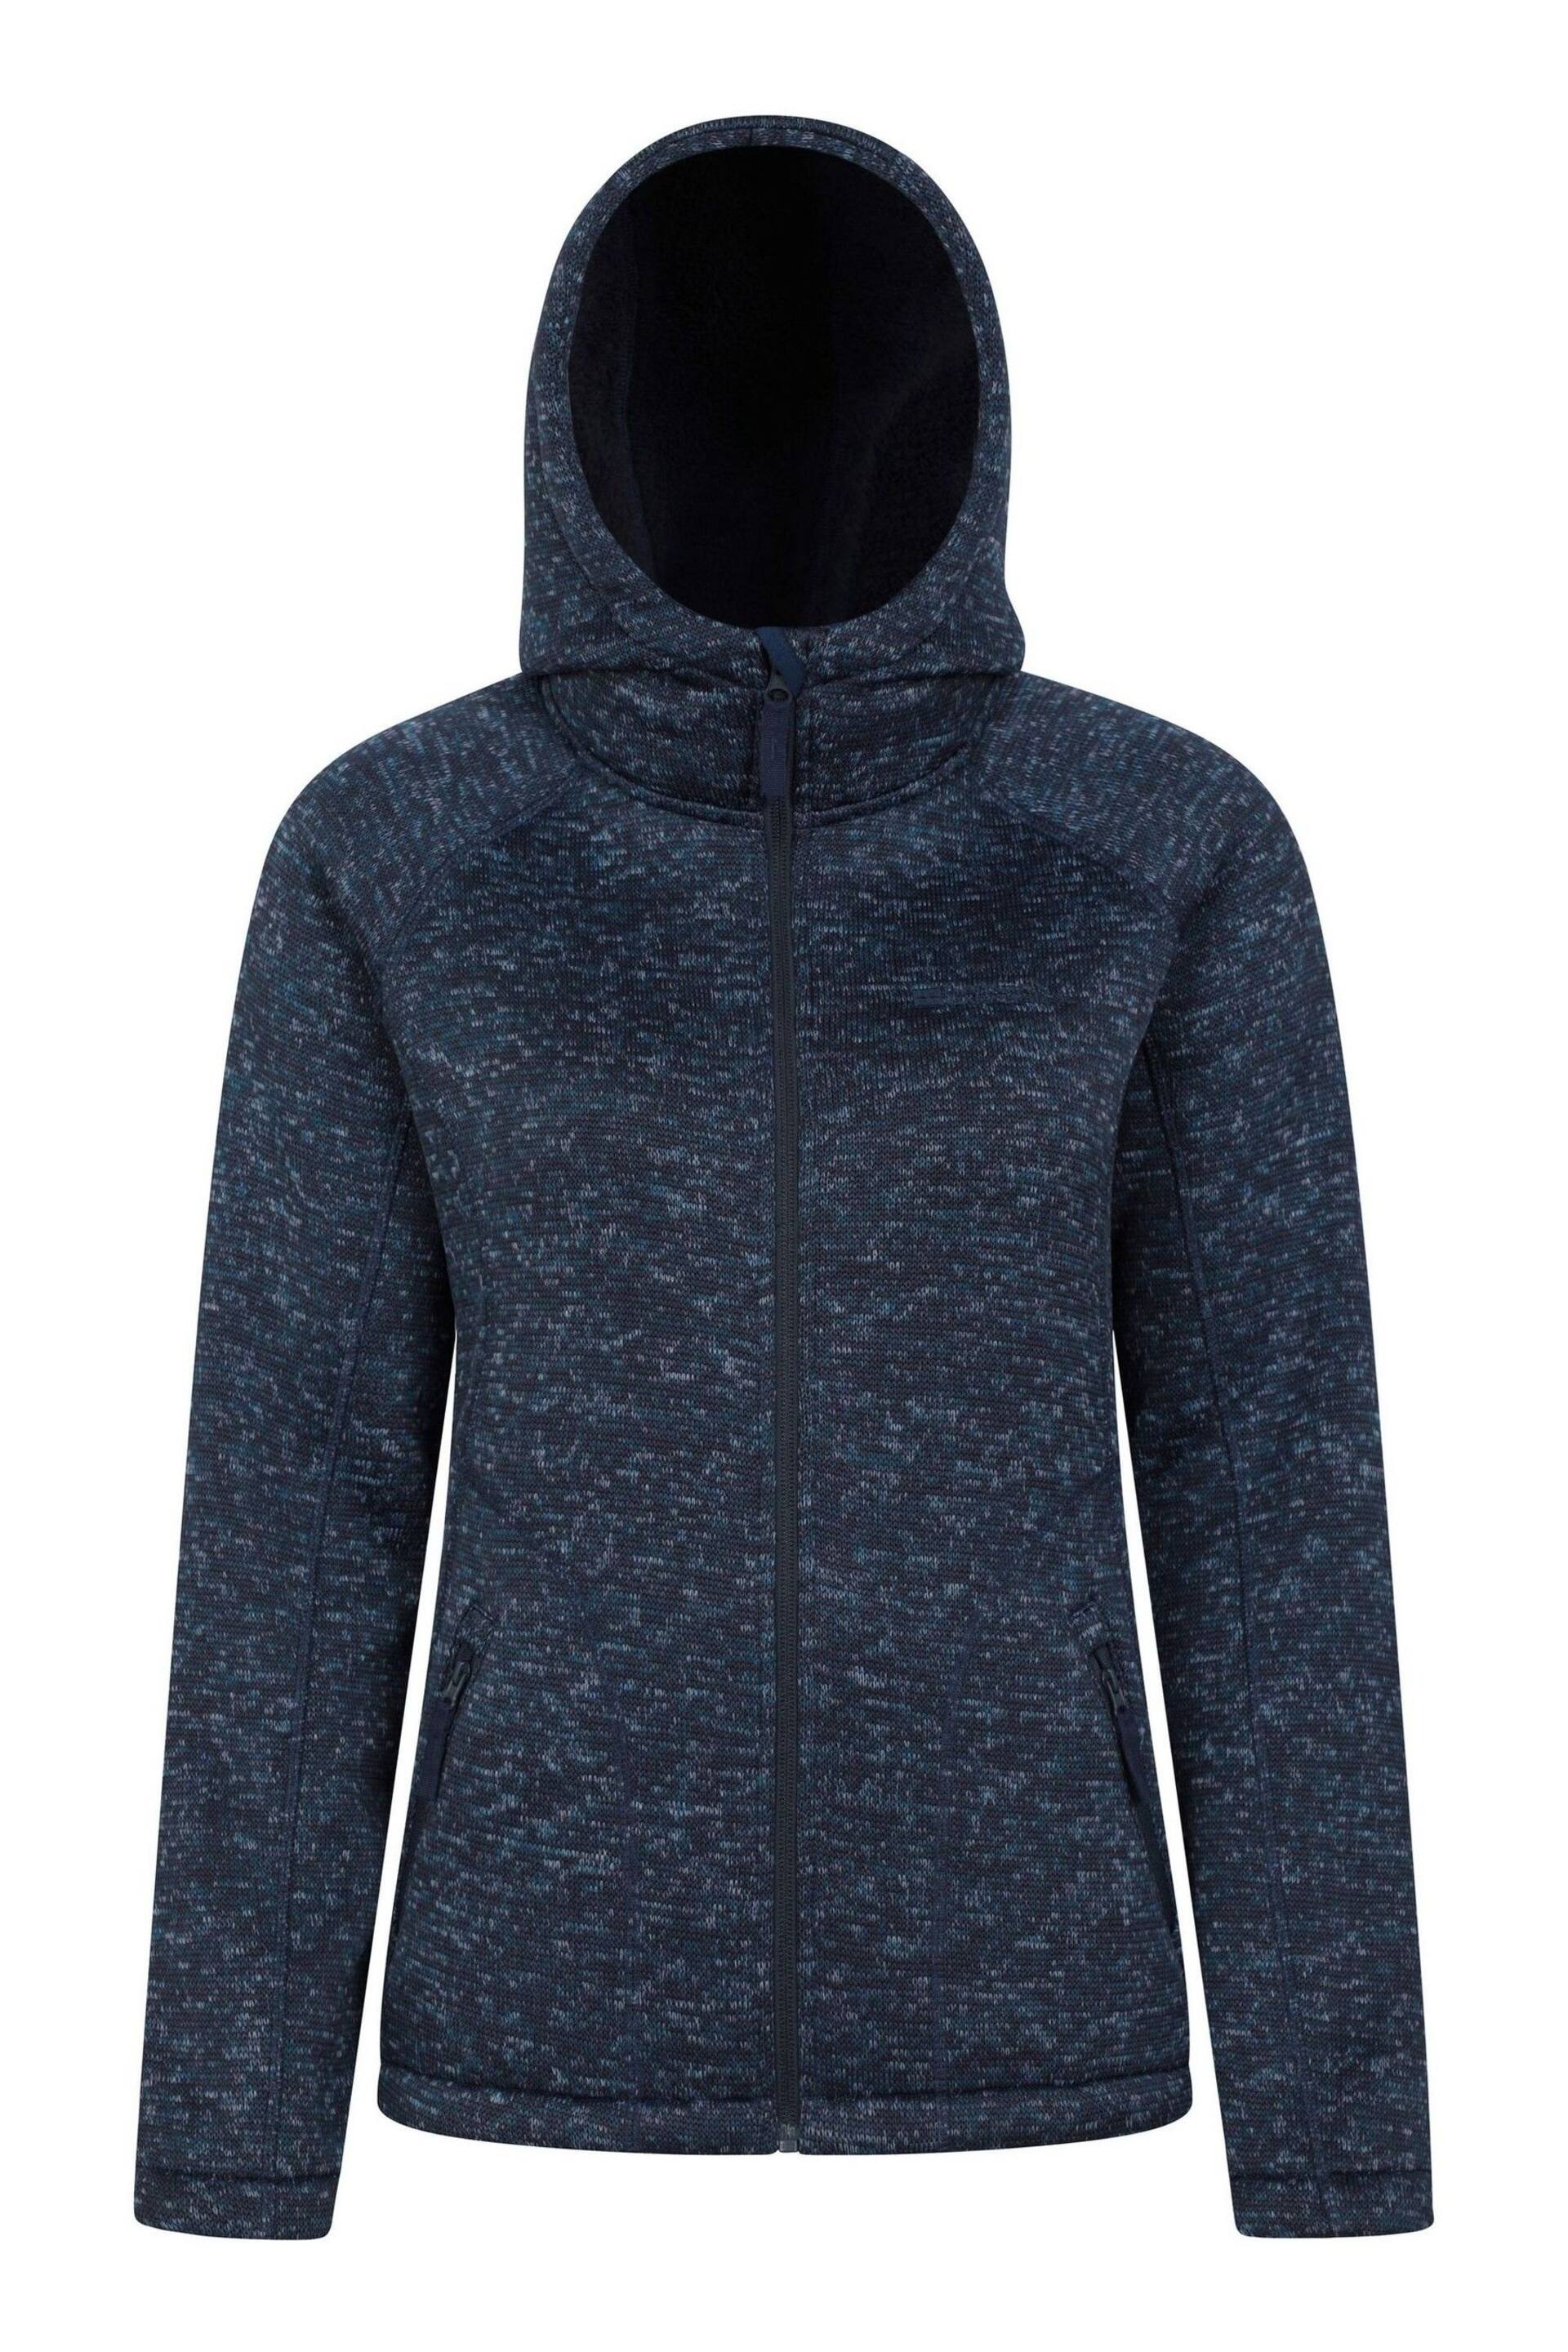 Mountain Warehouse Navy Blue Nevis Sherpa Lined Hoodie - Image 1 of 5